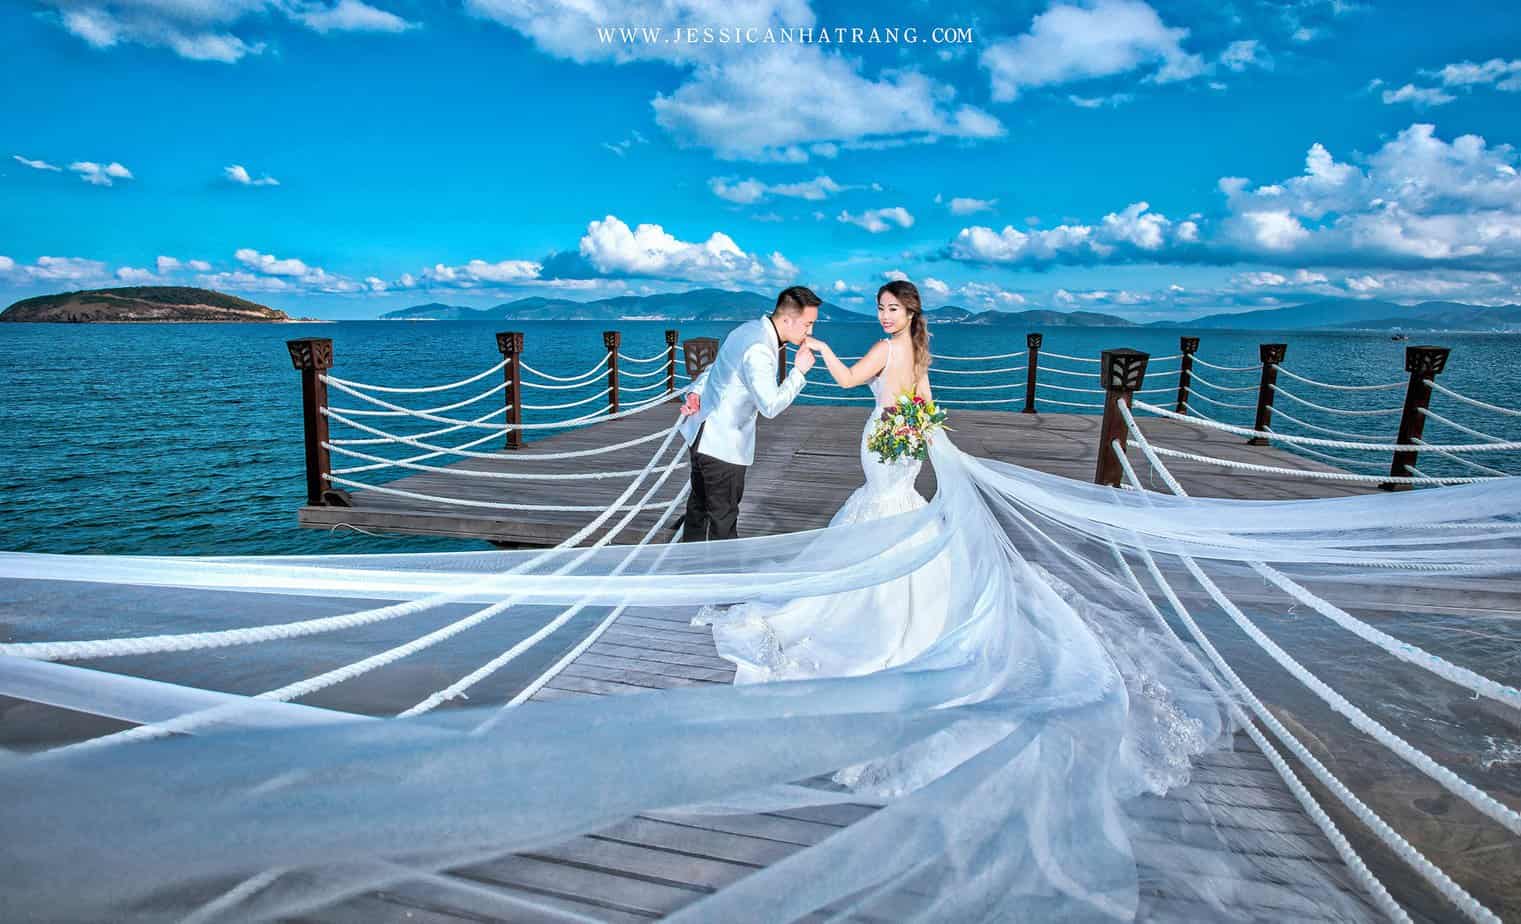 - Top 10 Beautiful Wedding Photography Services In Nha Trang